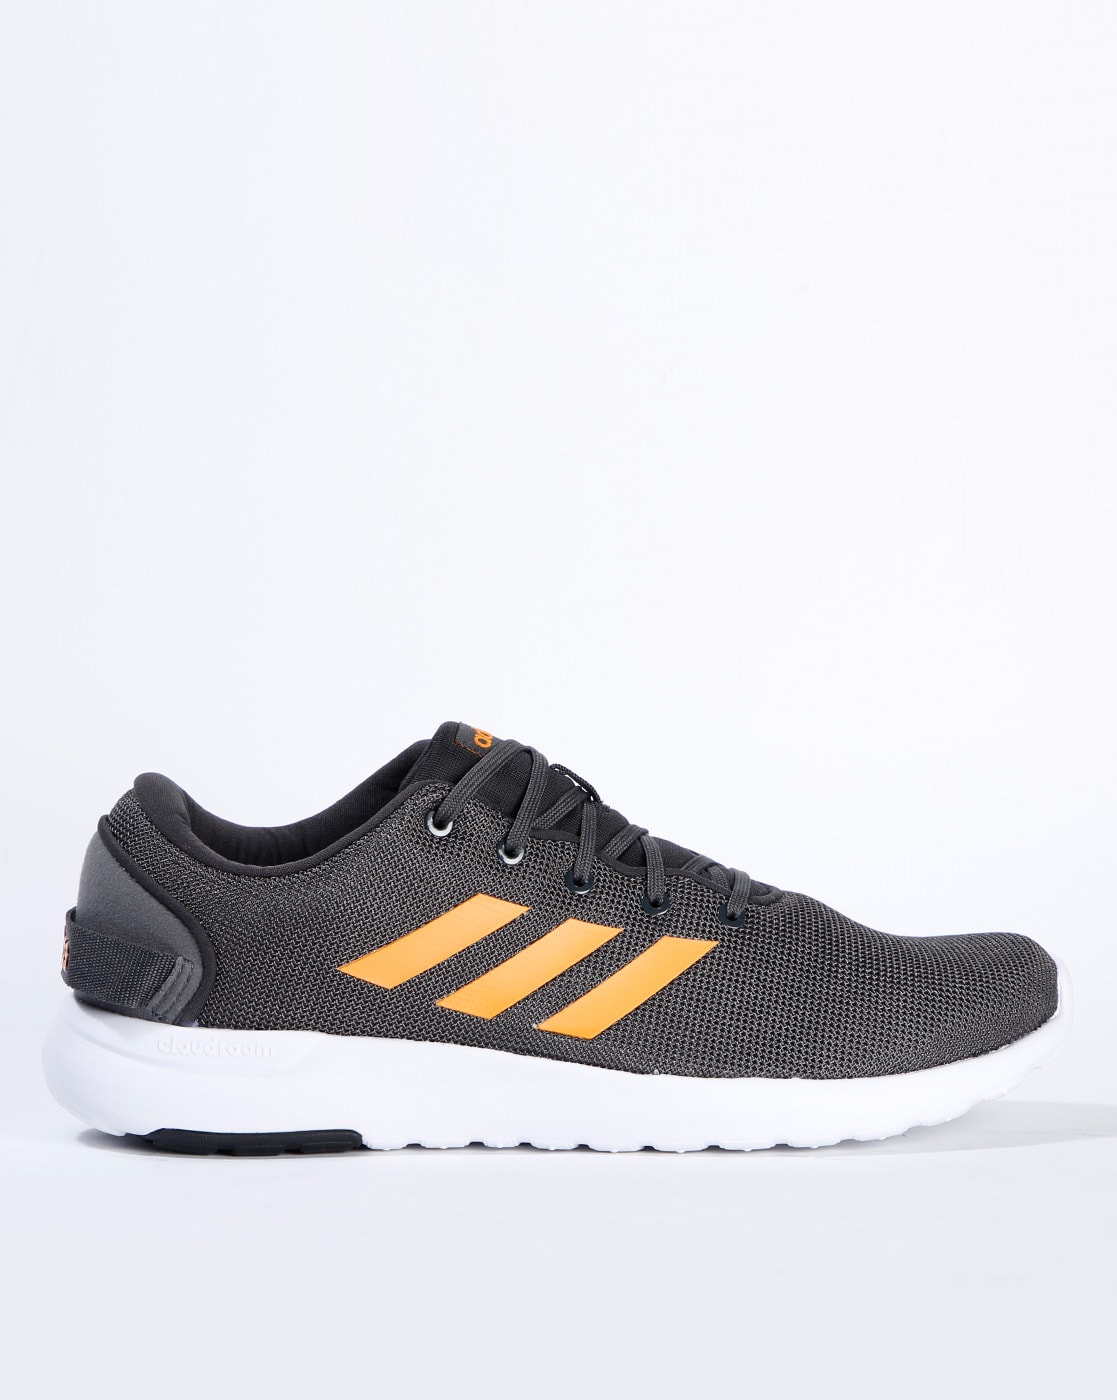 adidas running shoes discount